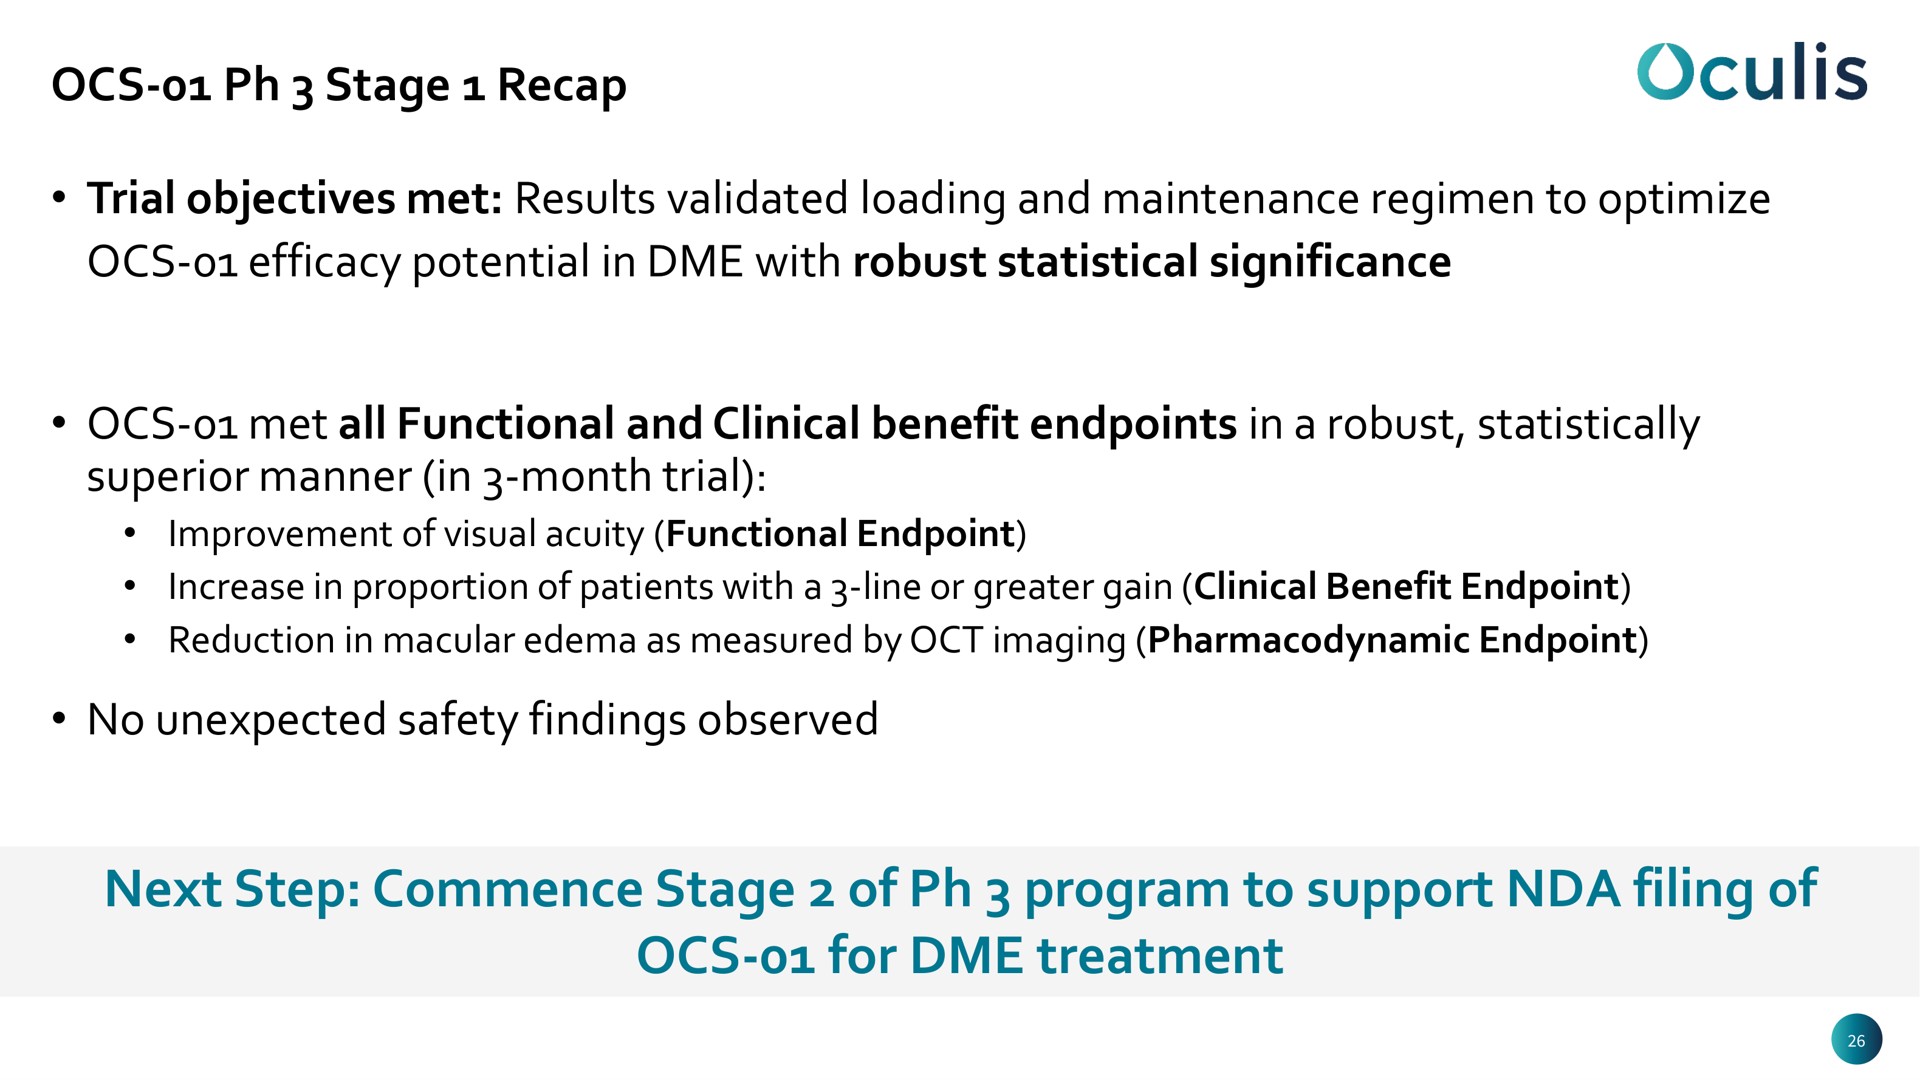 stage recap trial objectives met results validated loading and maintenance regimen to optimize efficacy potential in with robust statistical significance met all functional and clinical benefit in a robust statistically superior manner in month trial no unexpected safety findings observed next step commence stage of program to support filing of for treatment | Oculis